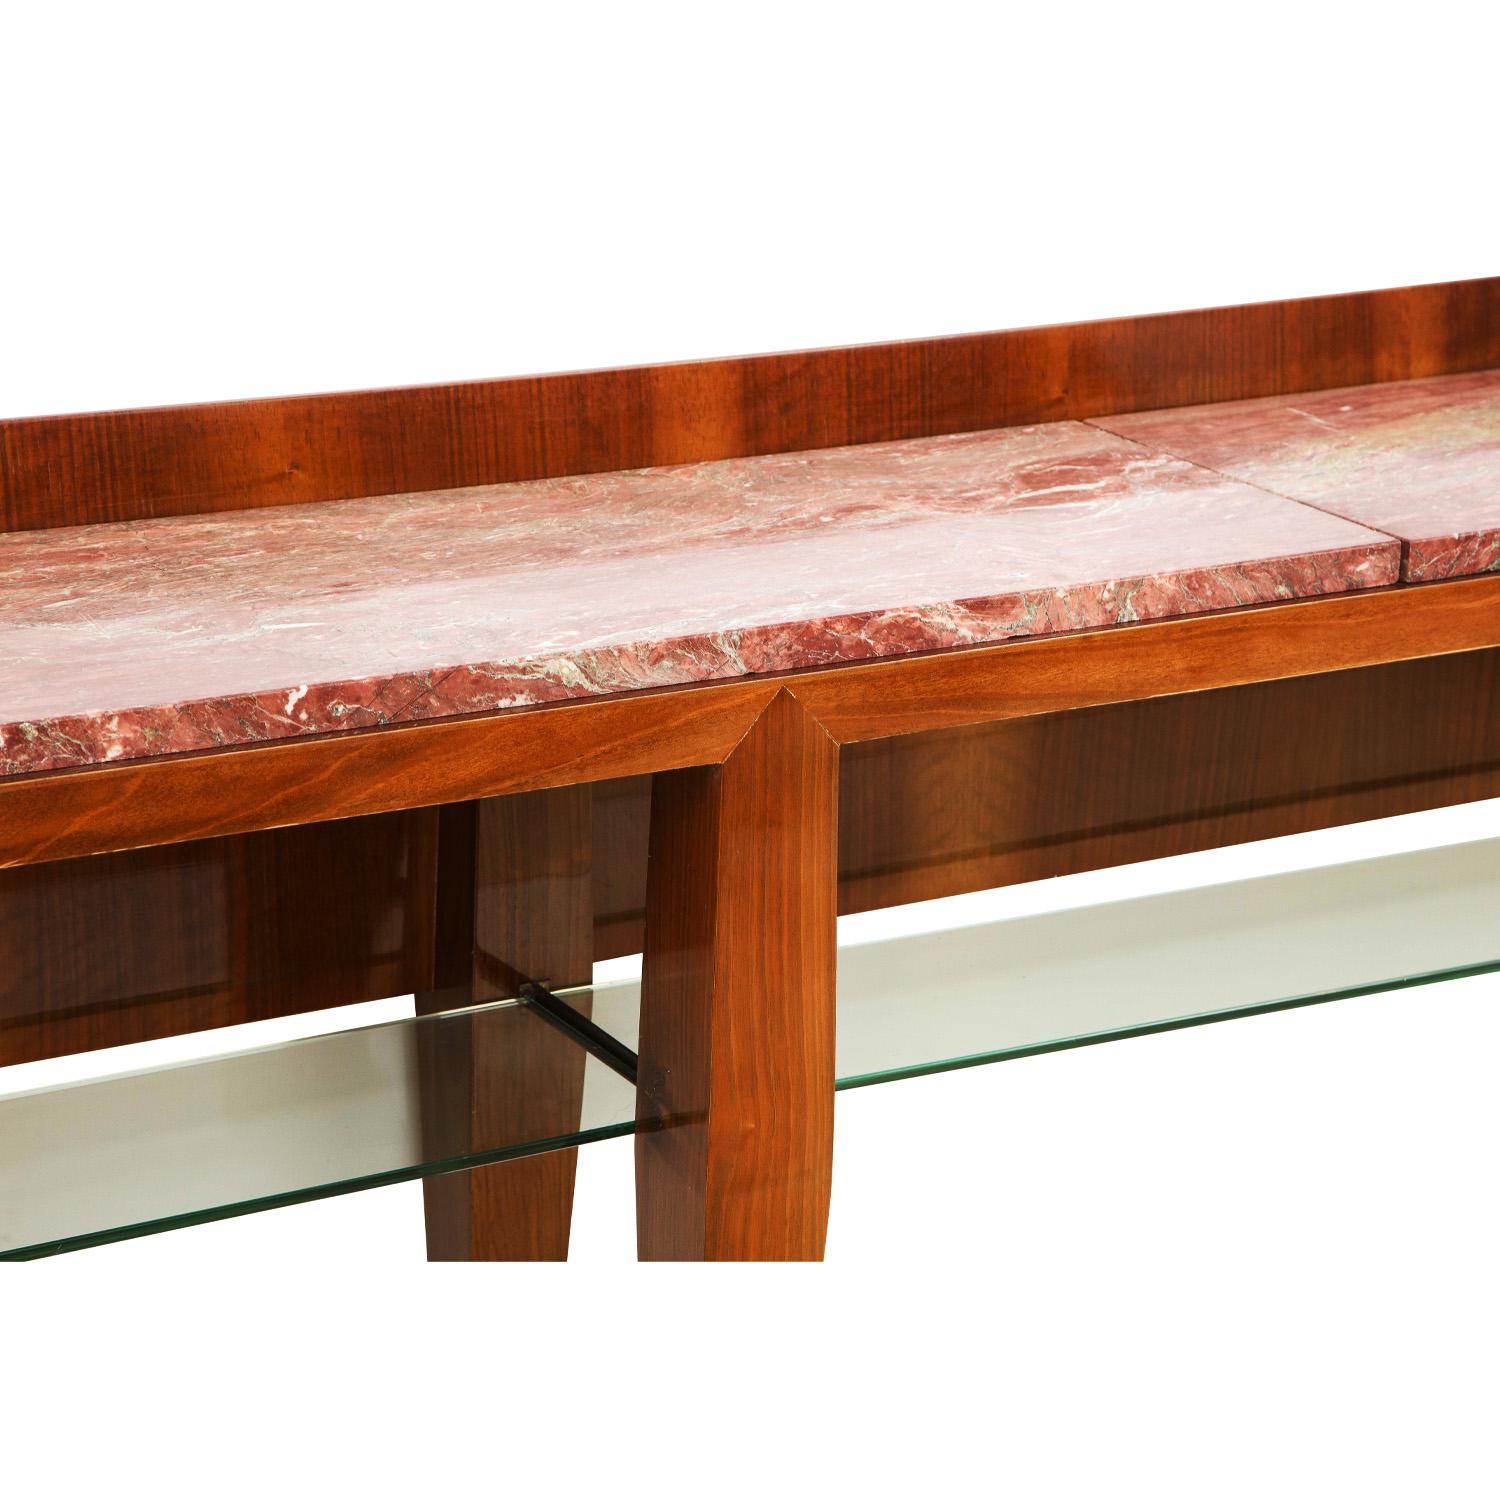 Hand-Crafted Gio Ponti Grand Console Table in Cherry with Red Marble Top ca 1958 For Sale